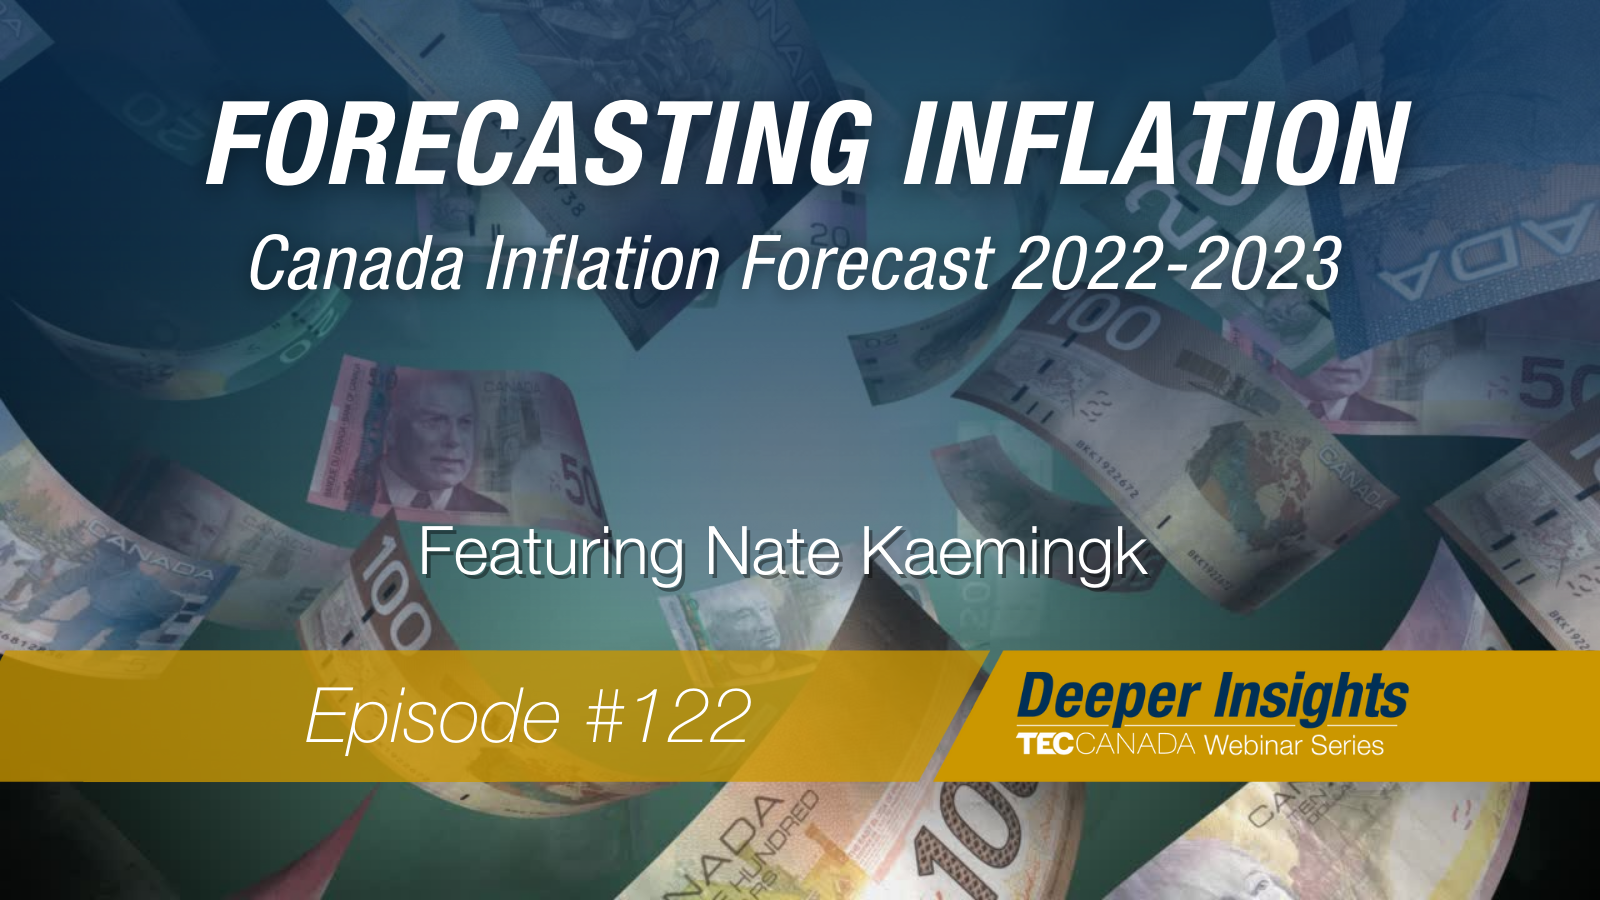 Background image is Canadian bills floating around. Overlaying text reads: Forecasting Inflation. Canada Inflation Forecast 2022-2023 featuring Nate Kaemingk. Episode #122. Deeper Insights Webinar, TEC Canada.